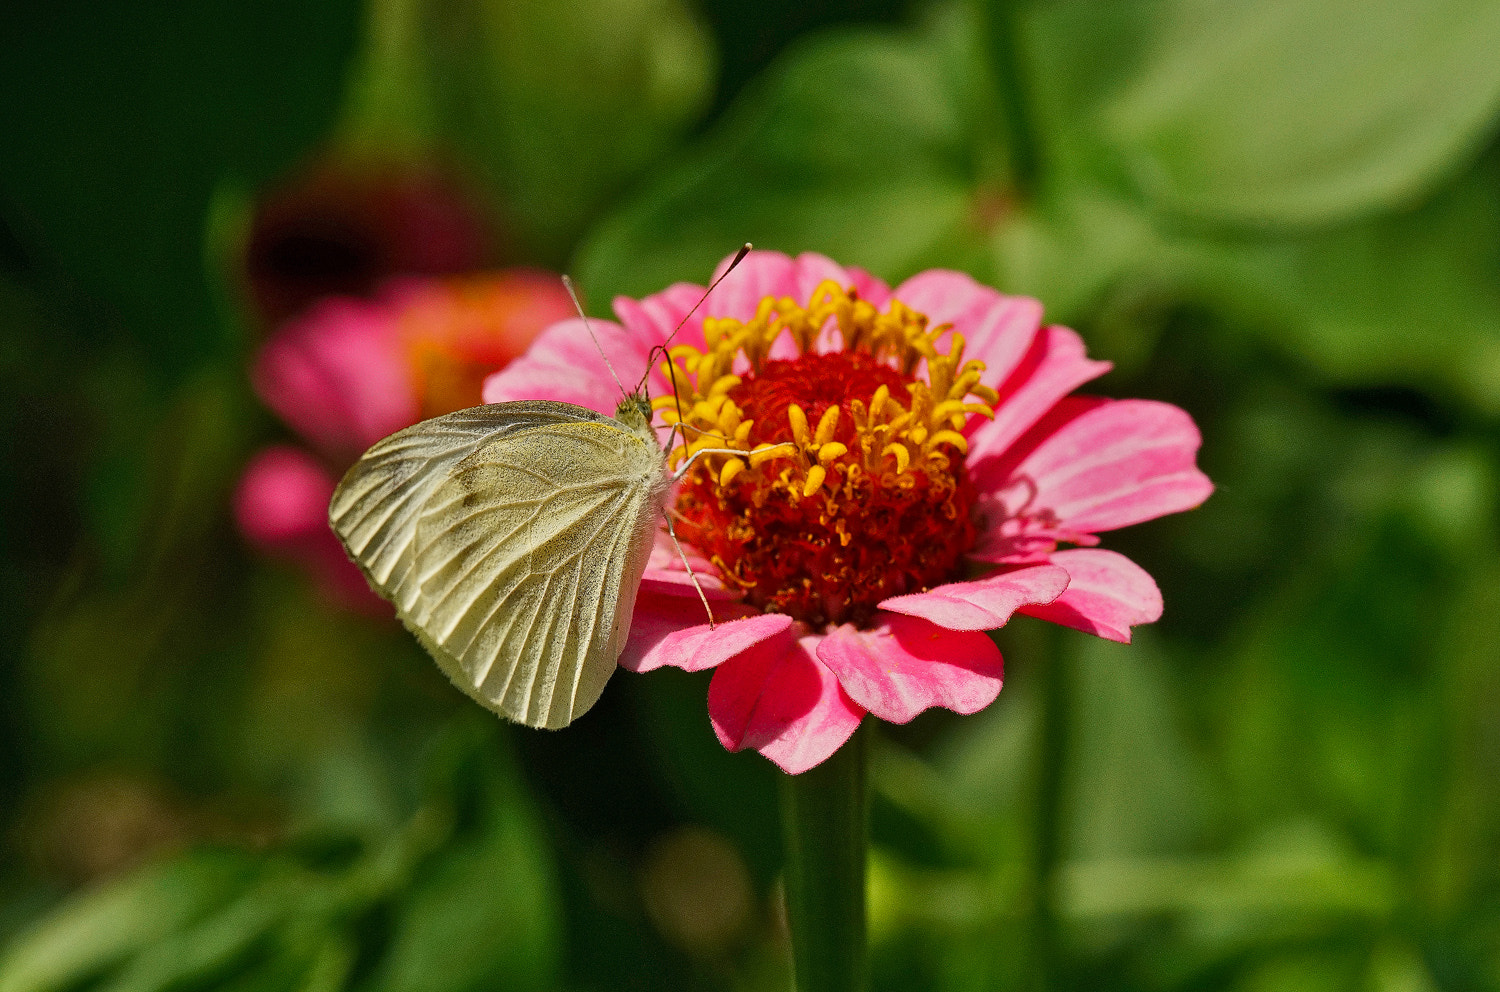 100mm F2.8 SSM sample photo. Unexceptional butterfly on zinnia photography